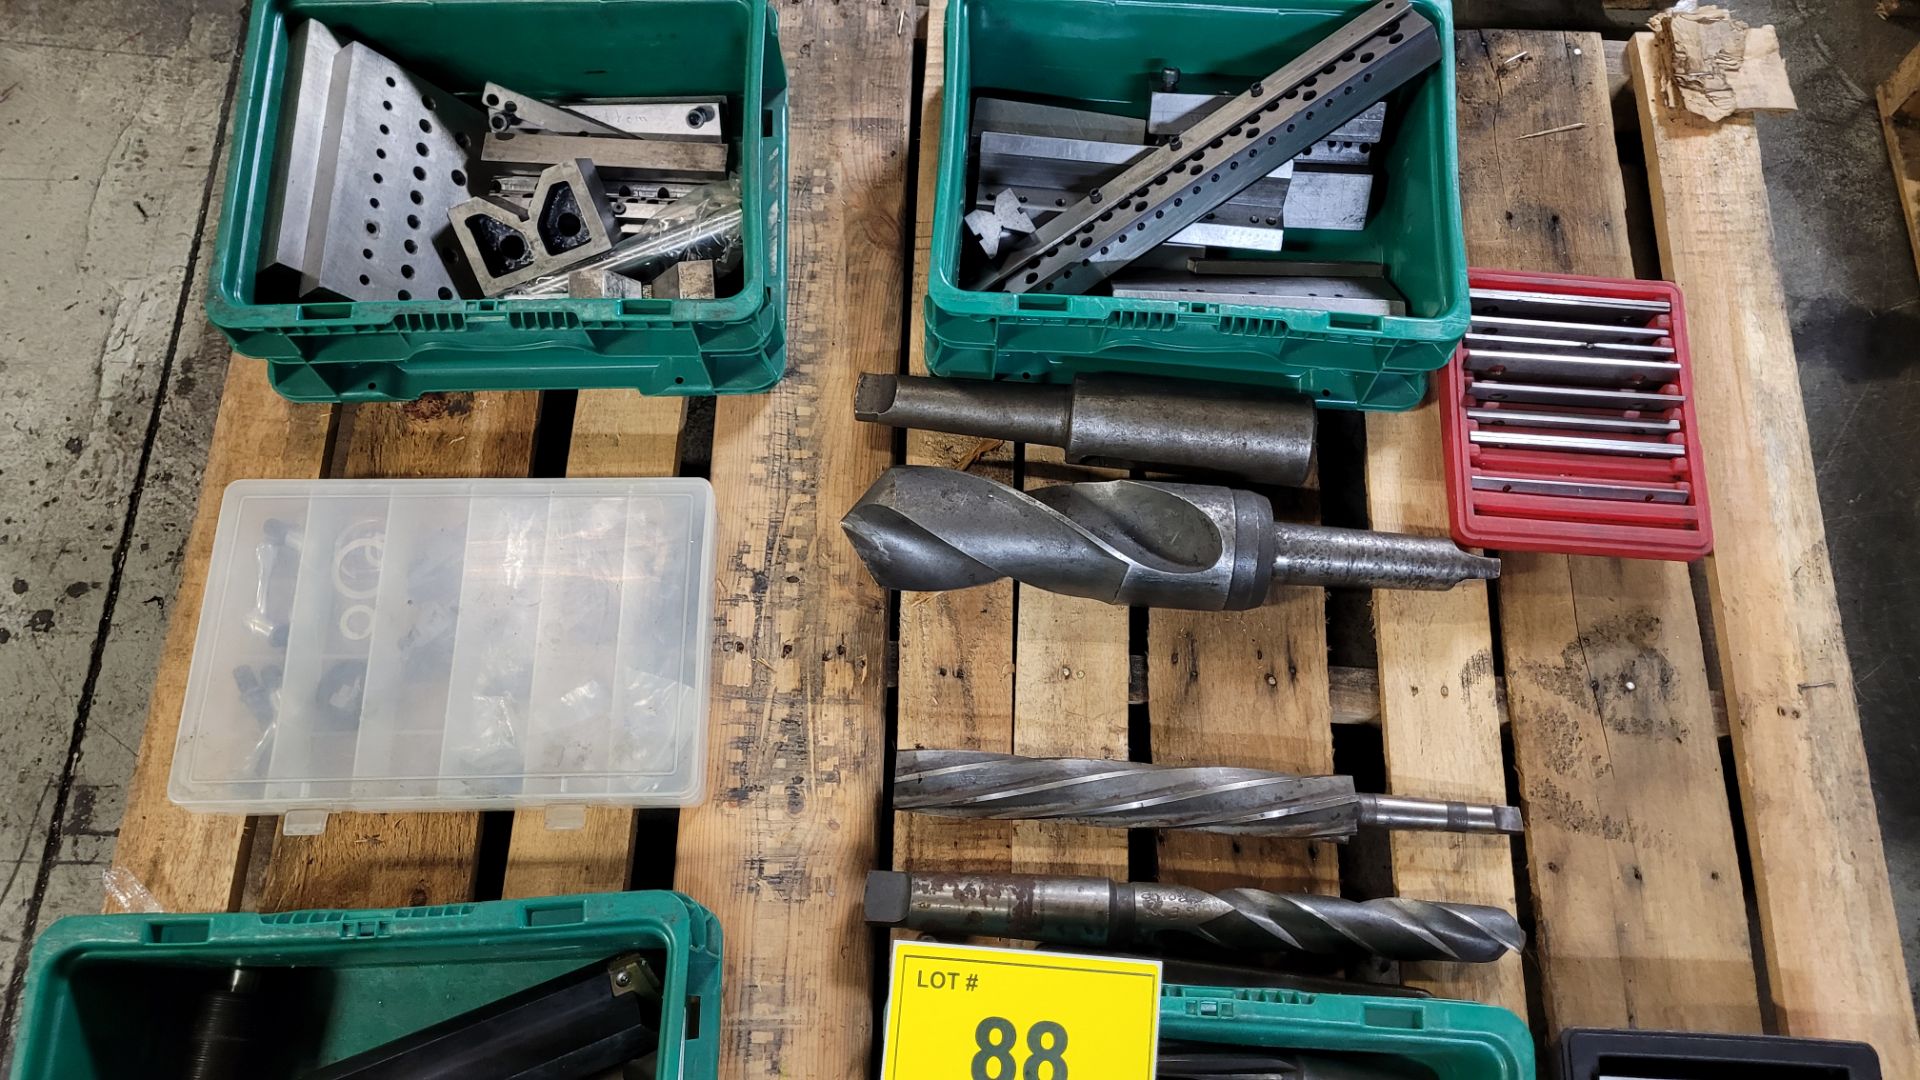 LOT OF ASST. DRILL BITS, REAMERS, SLEEVES, PARALLELS, SETUP BLOCKS, ETC. - Image 4 of 4